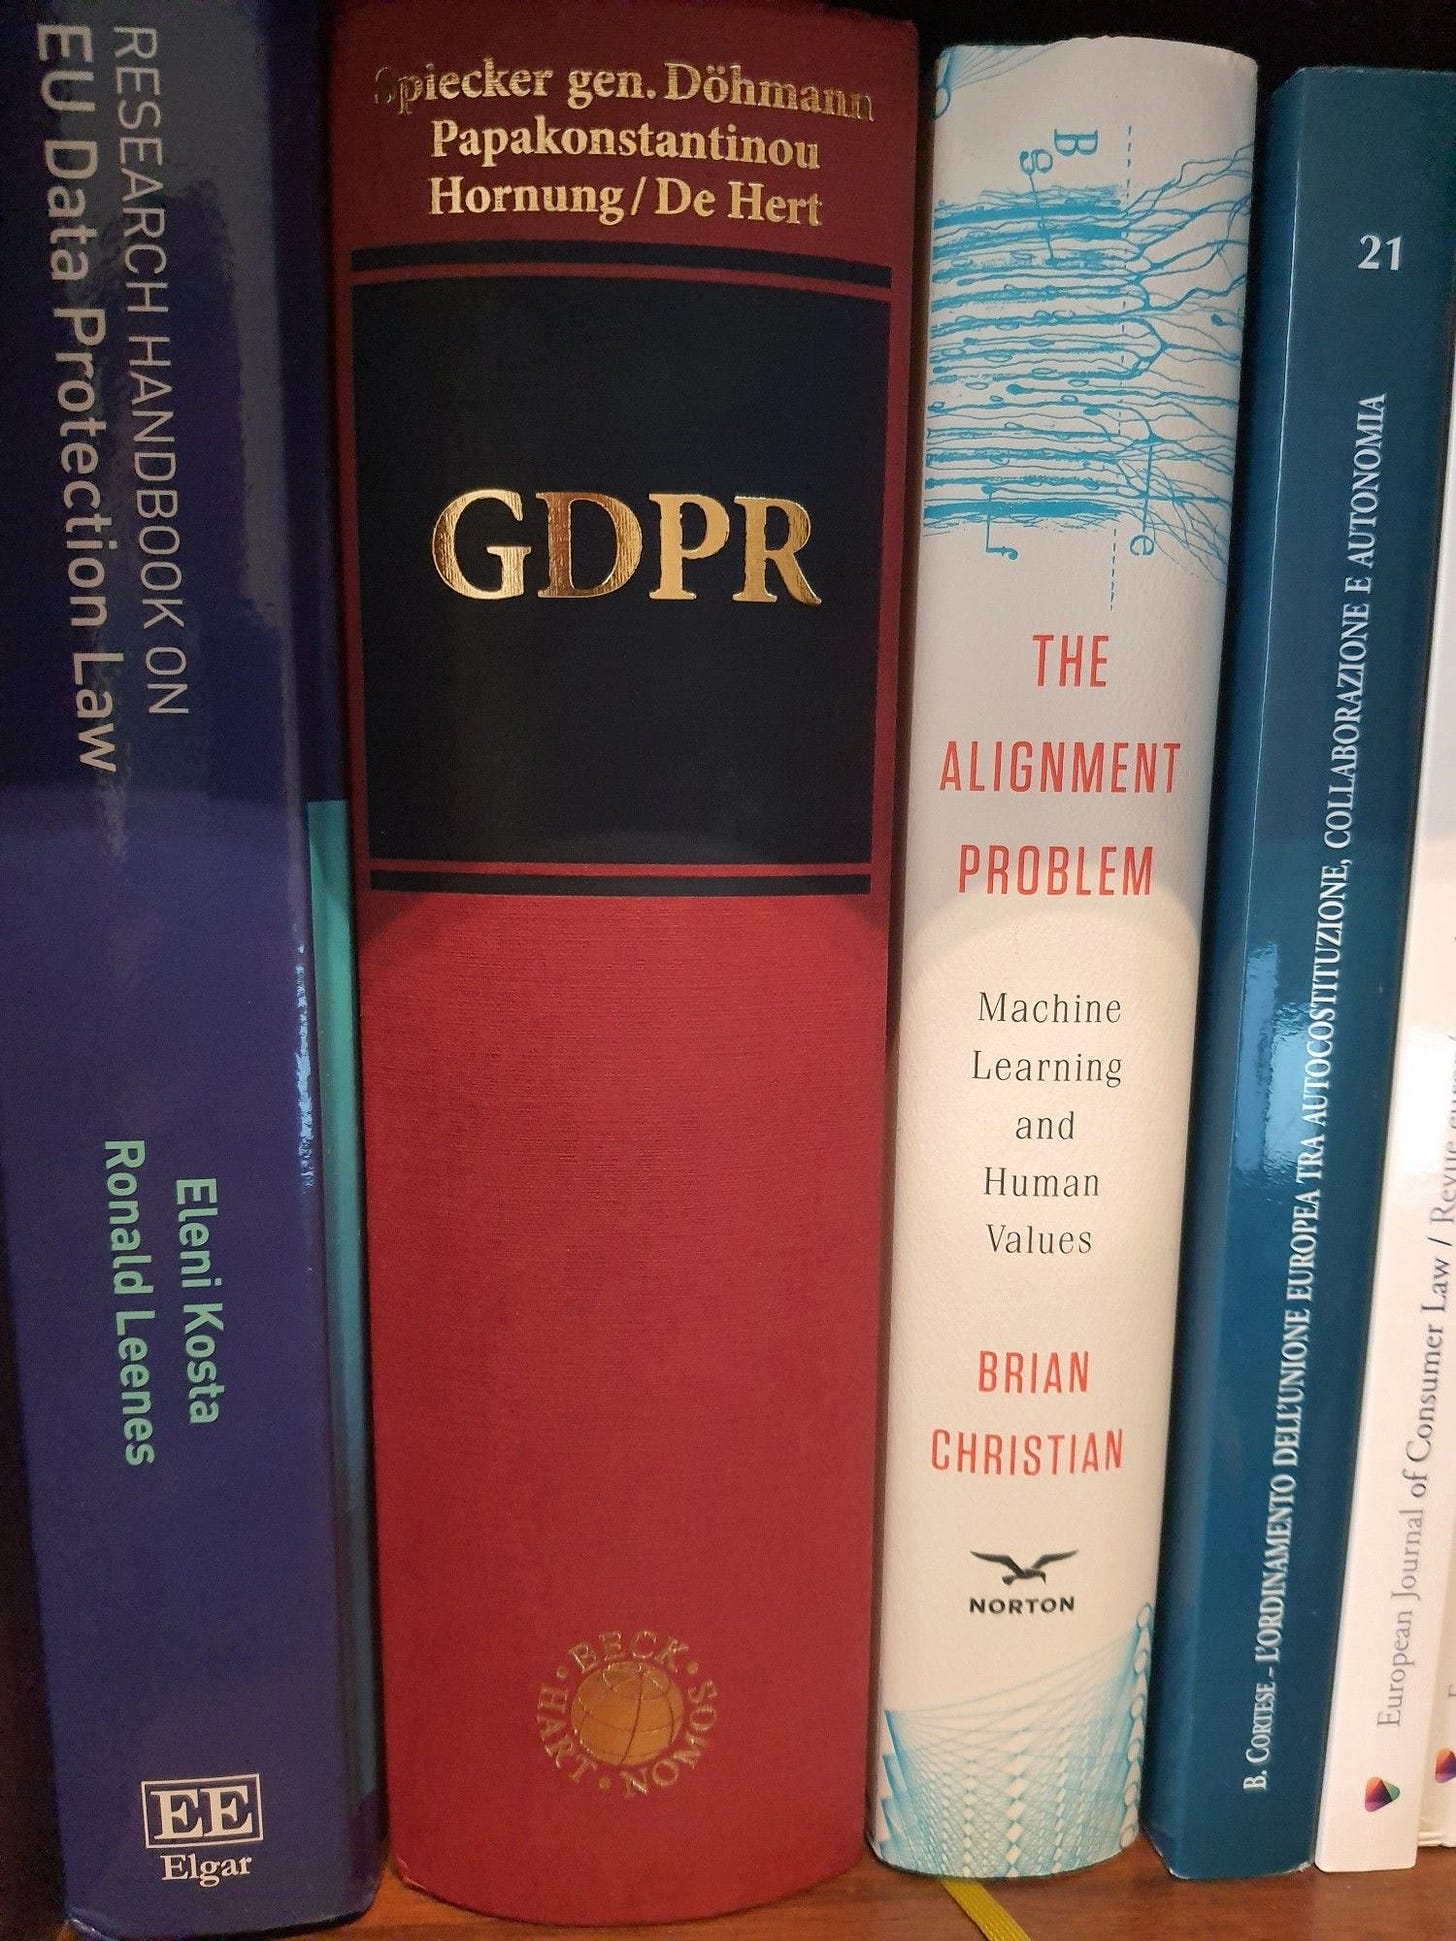 The GDPR commentary, with its more than 1300 pages and hard cover, dwarves the books that are close to it on my shelf.